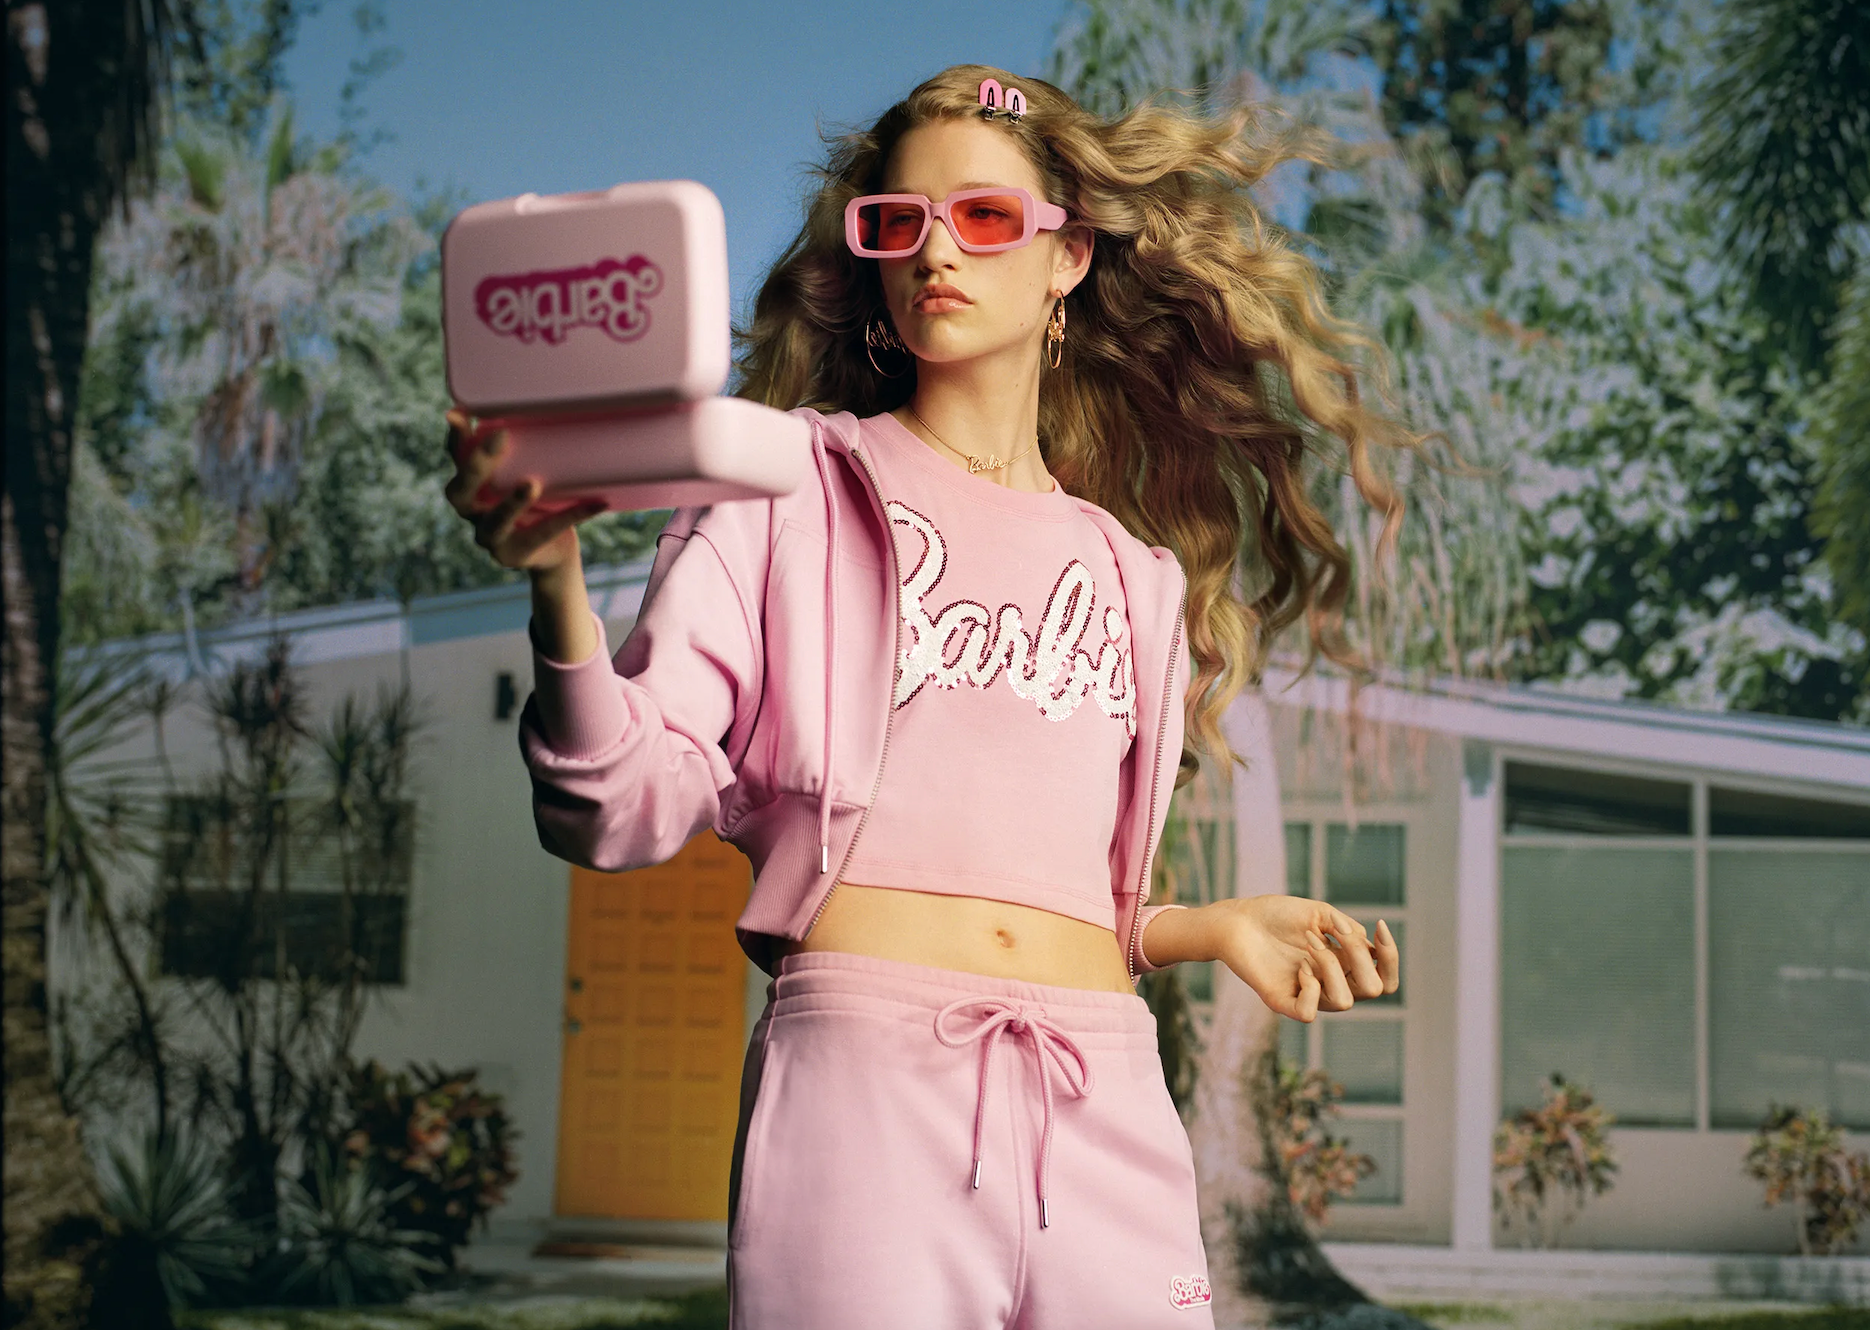 Propelled by the likes of Marvel’s flicks and ‘Barbie,’ film merch is fashion’s goldmine. But will it survive rising consumer consciousness of sustainability? Photo: Zara